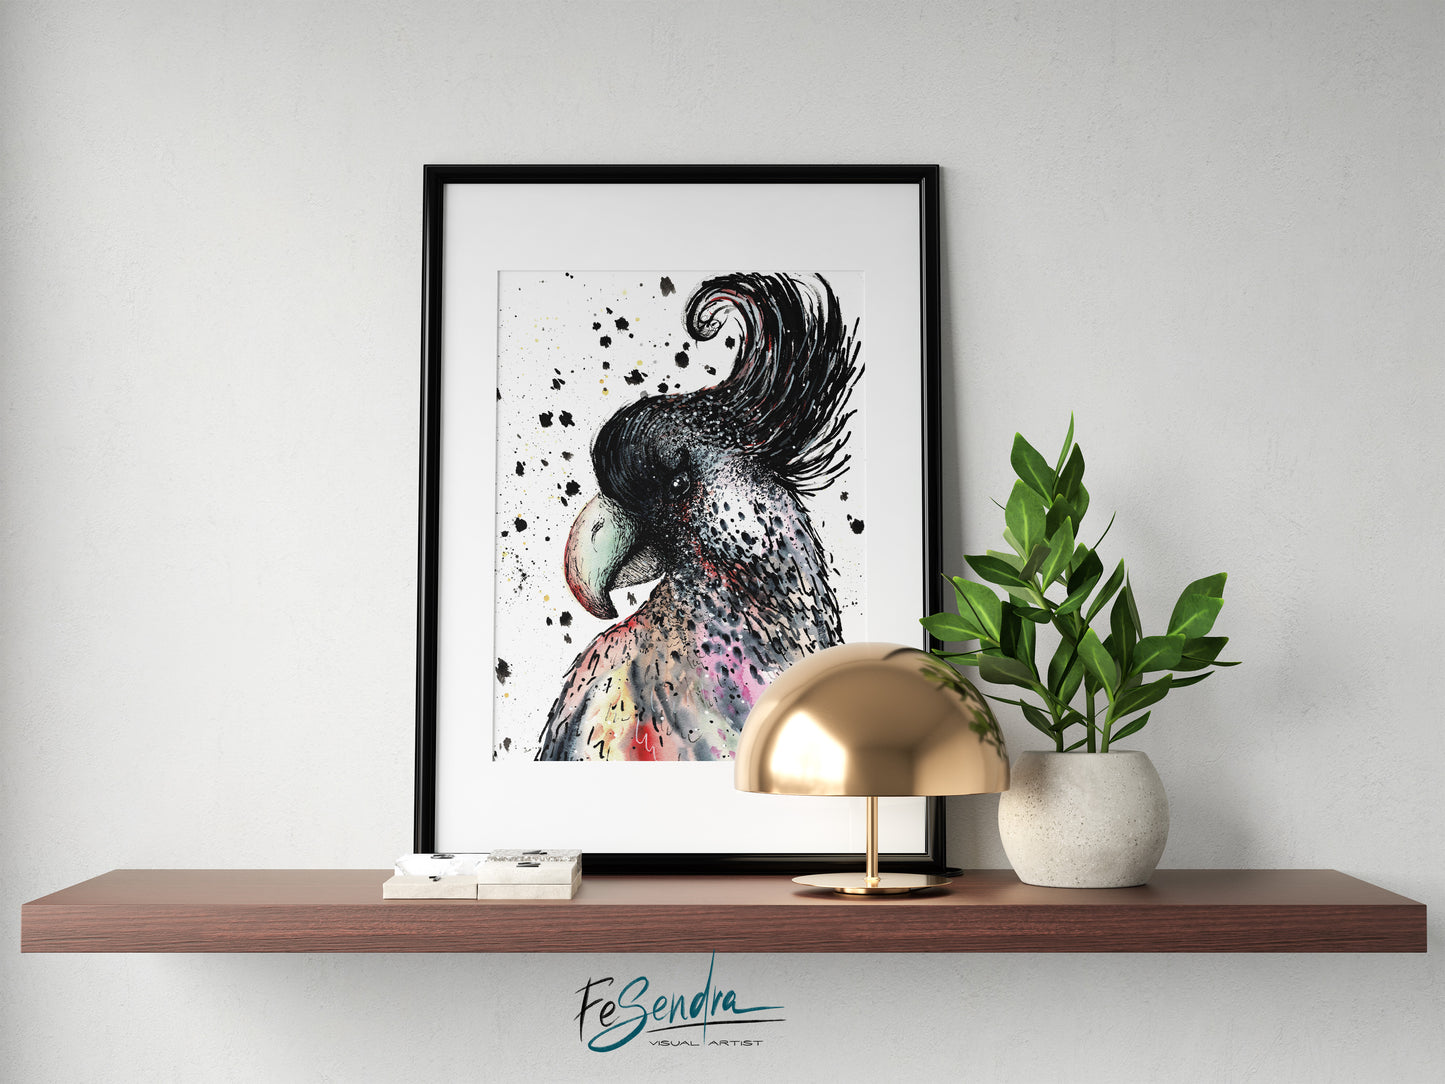 Printed Poster - The bird by FeSendra